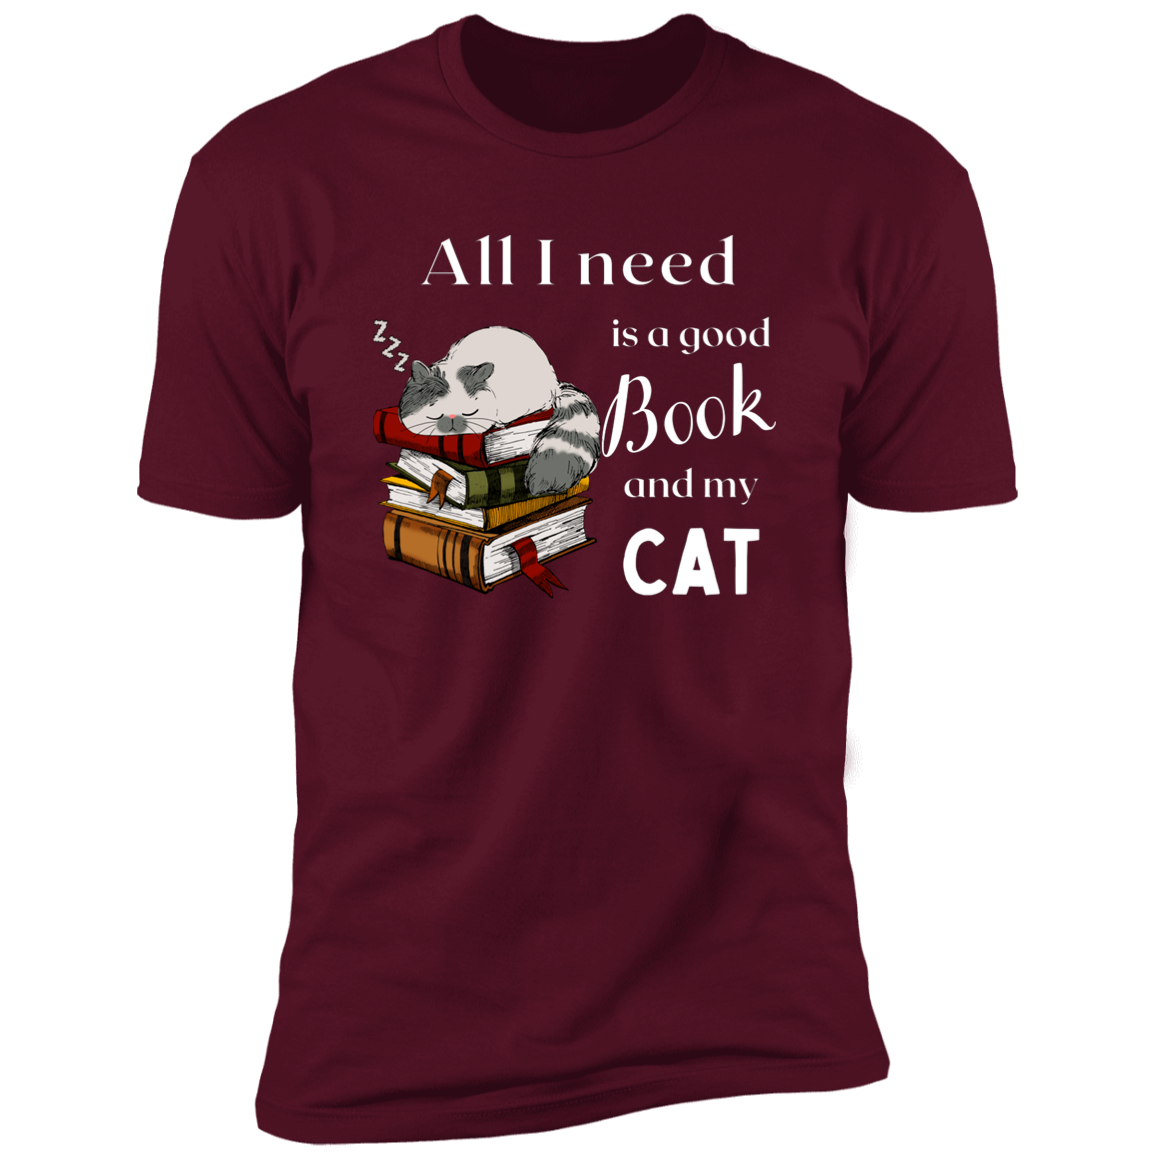 All I Need is a Good Book and My Cat t-shirt for humans, in maroon